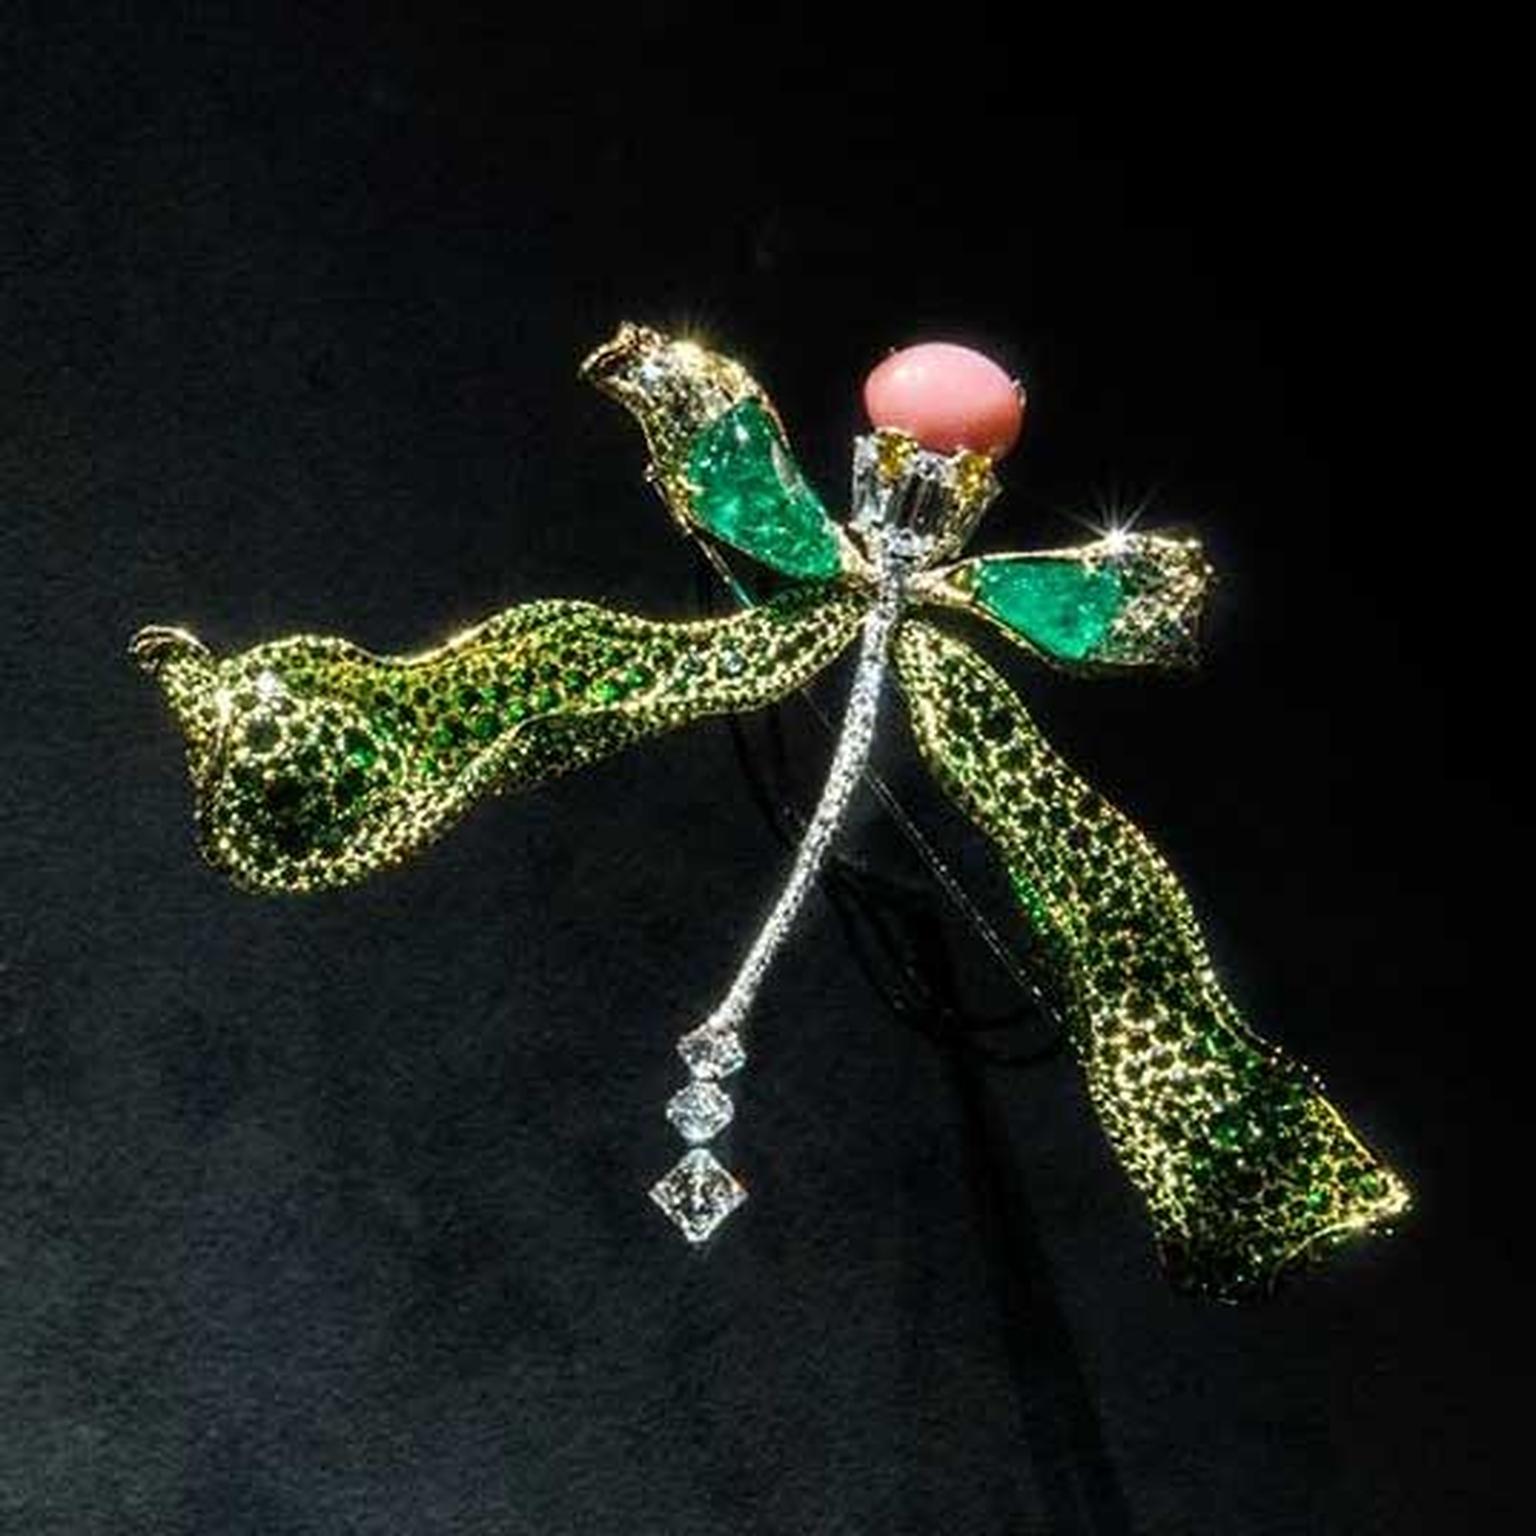 Cindy Chao Black Label Masterpiece 2018 dragonfly emerald brooch